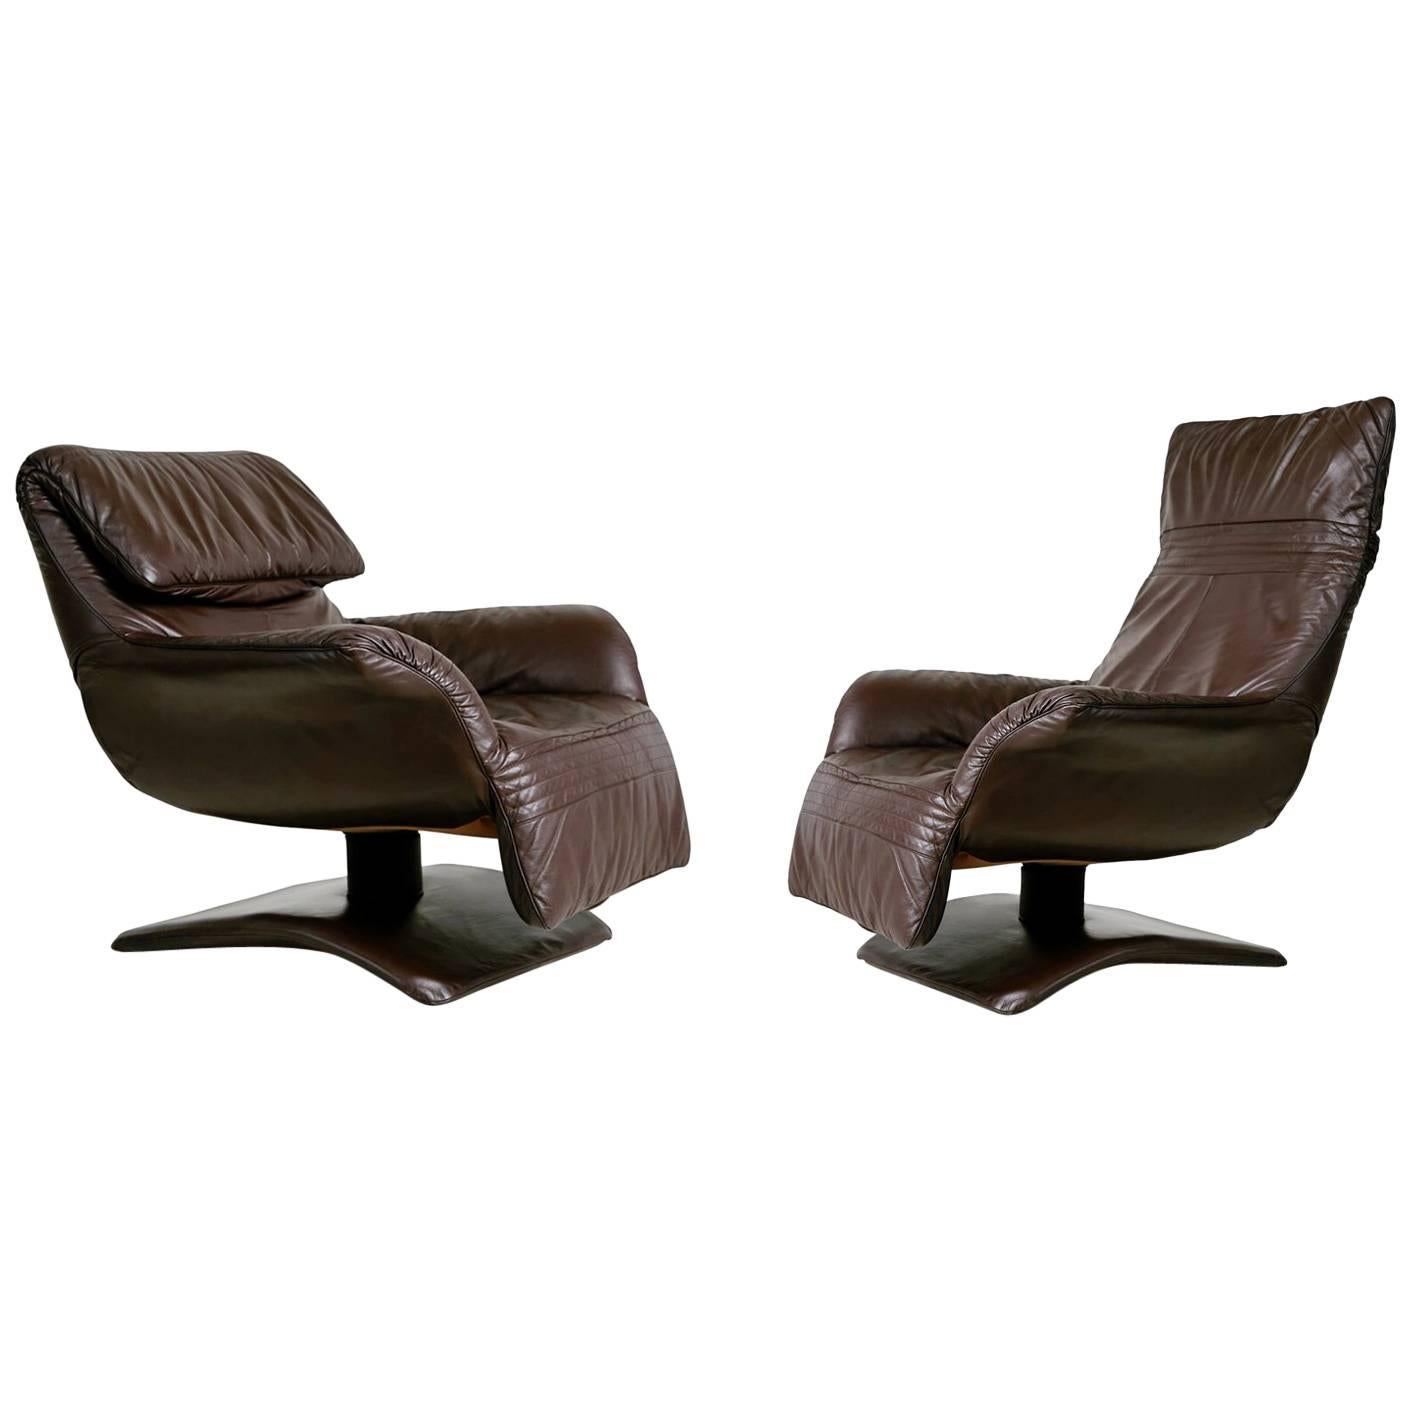 Scandinavian Modern Leather Club Chairs with Adjustable Headrests, Pair